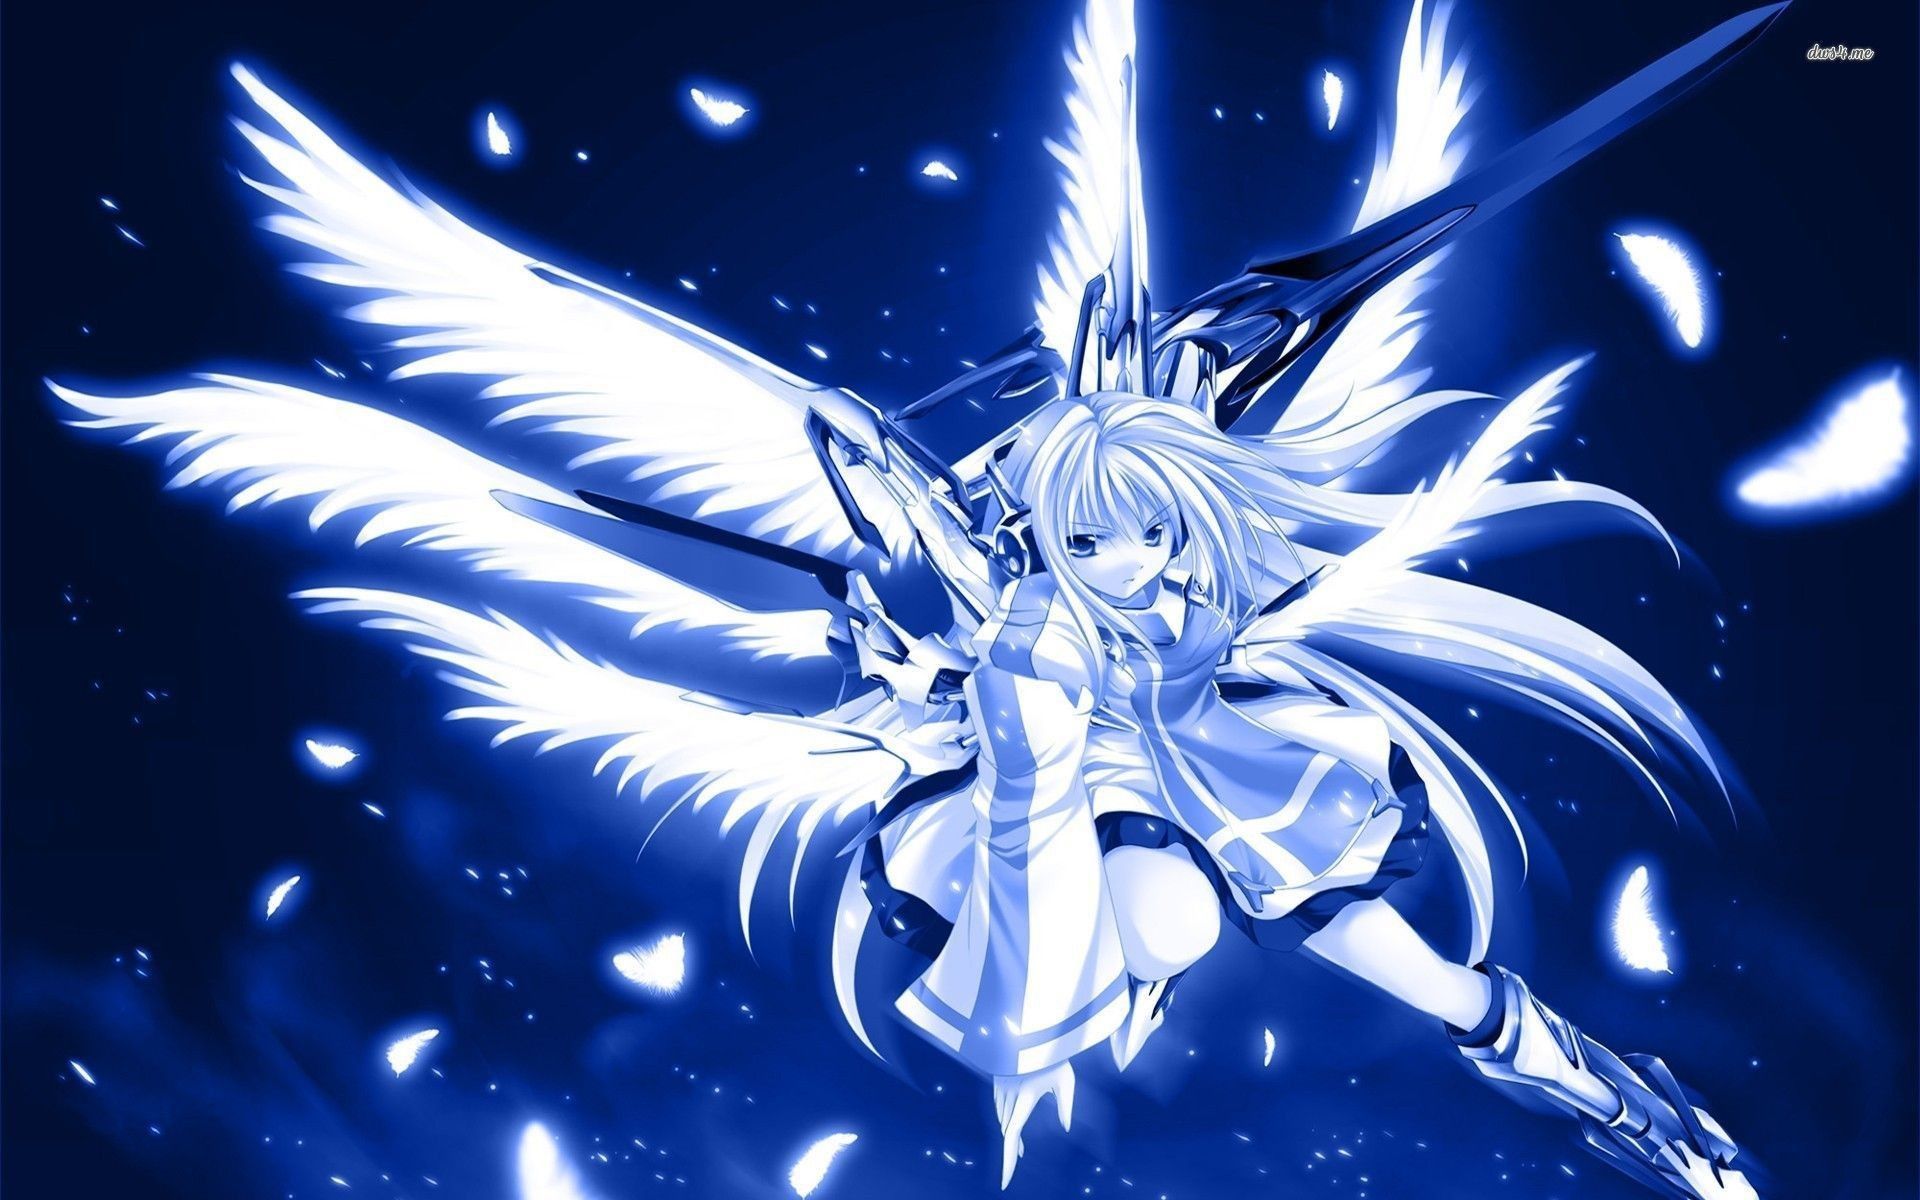 Cute Angel Anime Girl Wallpapers Wallpapers